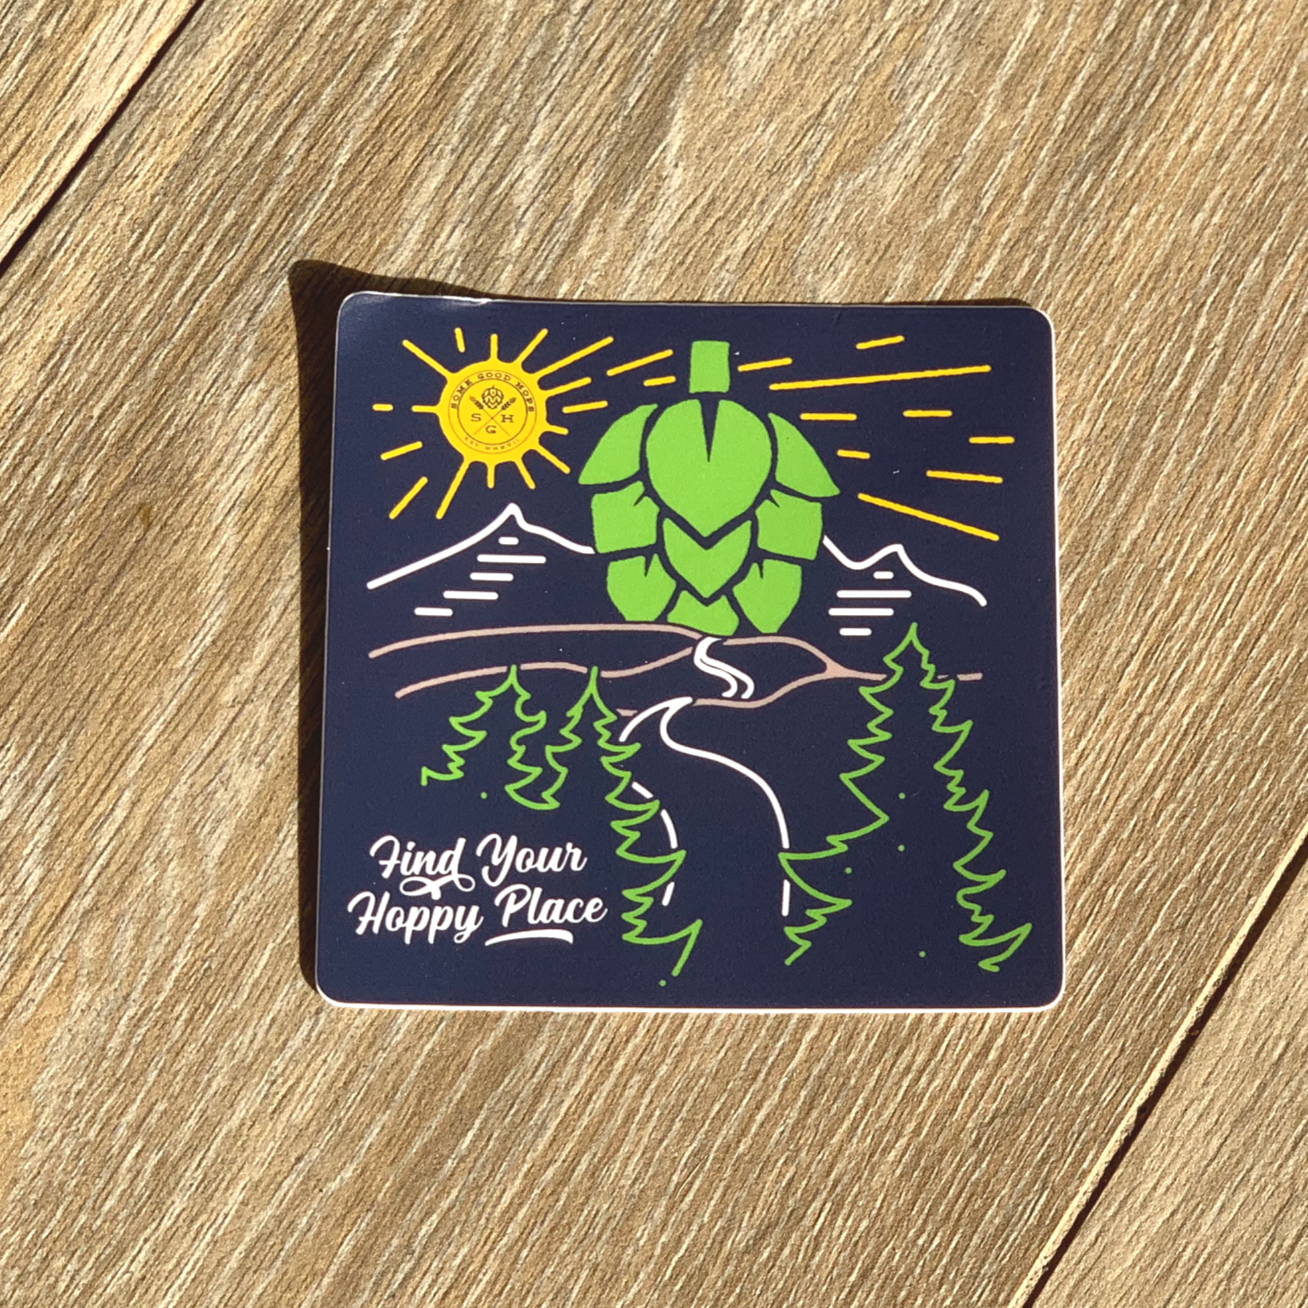 Some Good Hops Scenic Find Your Hoppy Place Sticker